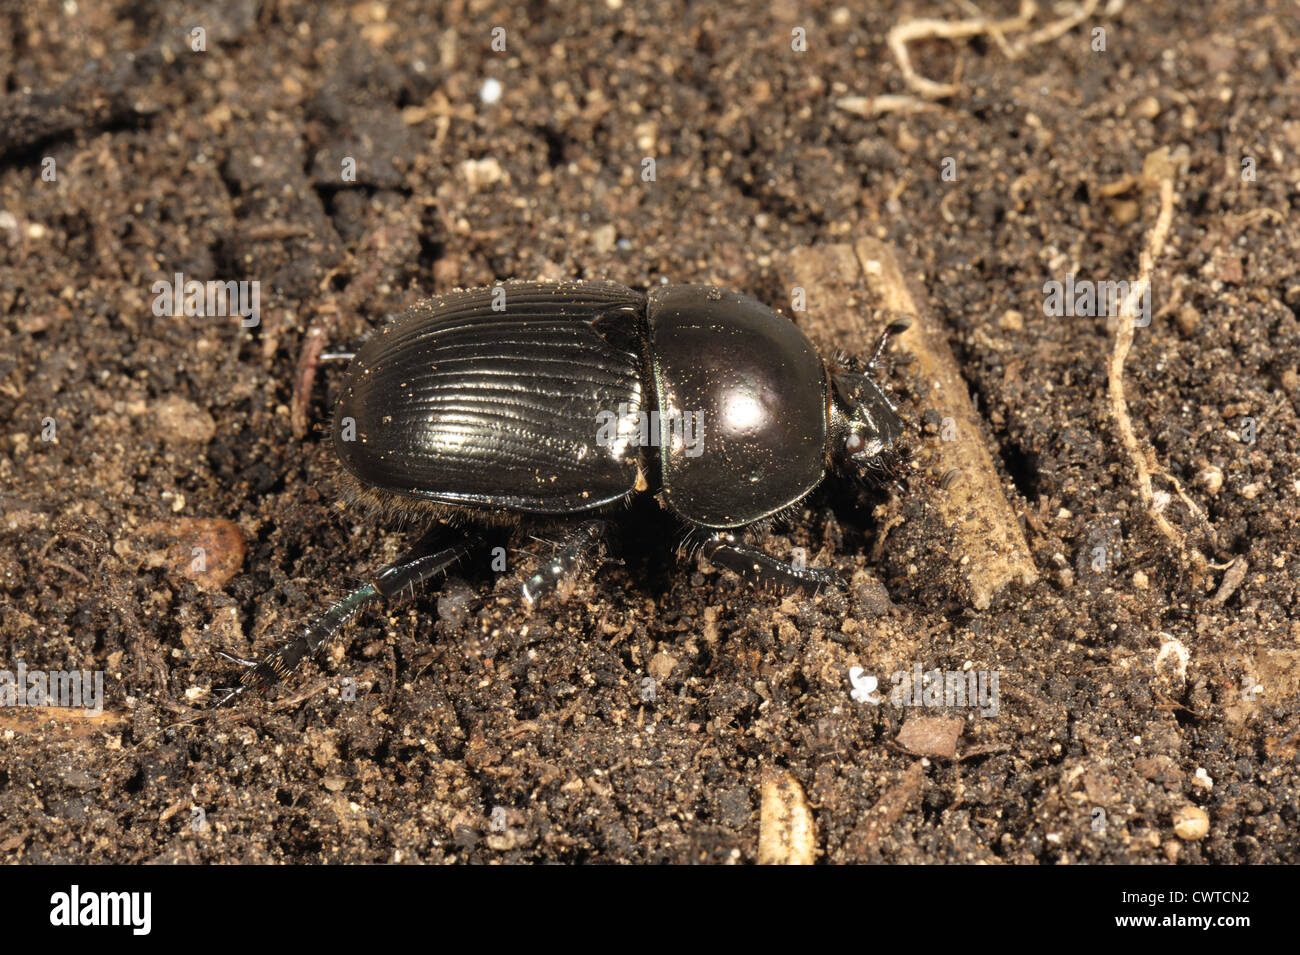 Dung or dor beetle or lousy watchman (Geotrupes stercoreus) on soil Stock Photo